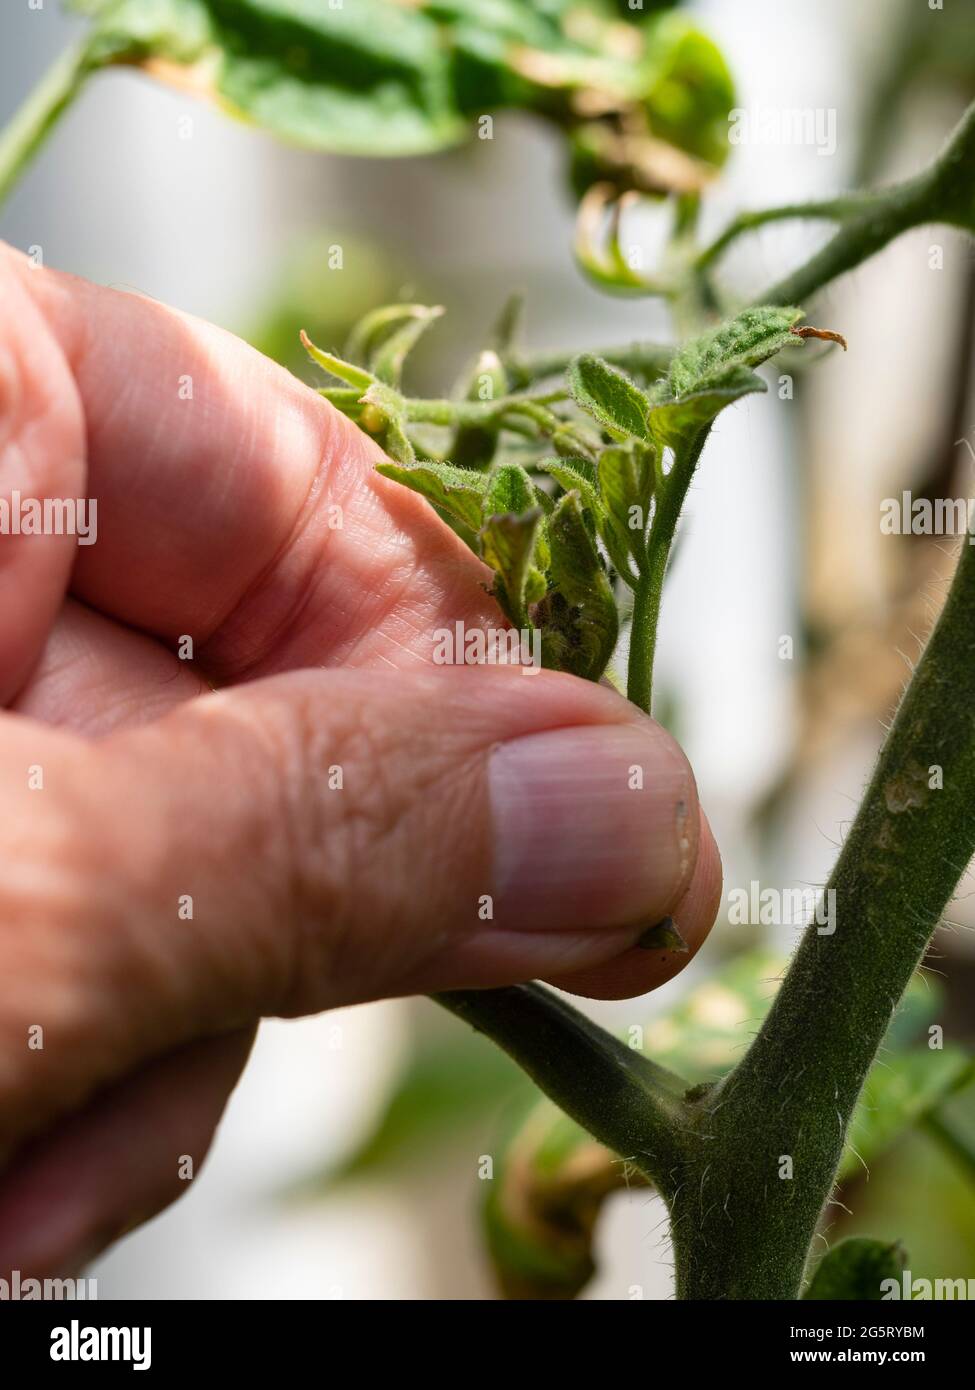 Removing the side shoot of the indeterminate cordon tomato Solanum lycopersicum 'Outdoor Girl' Stock Photo